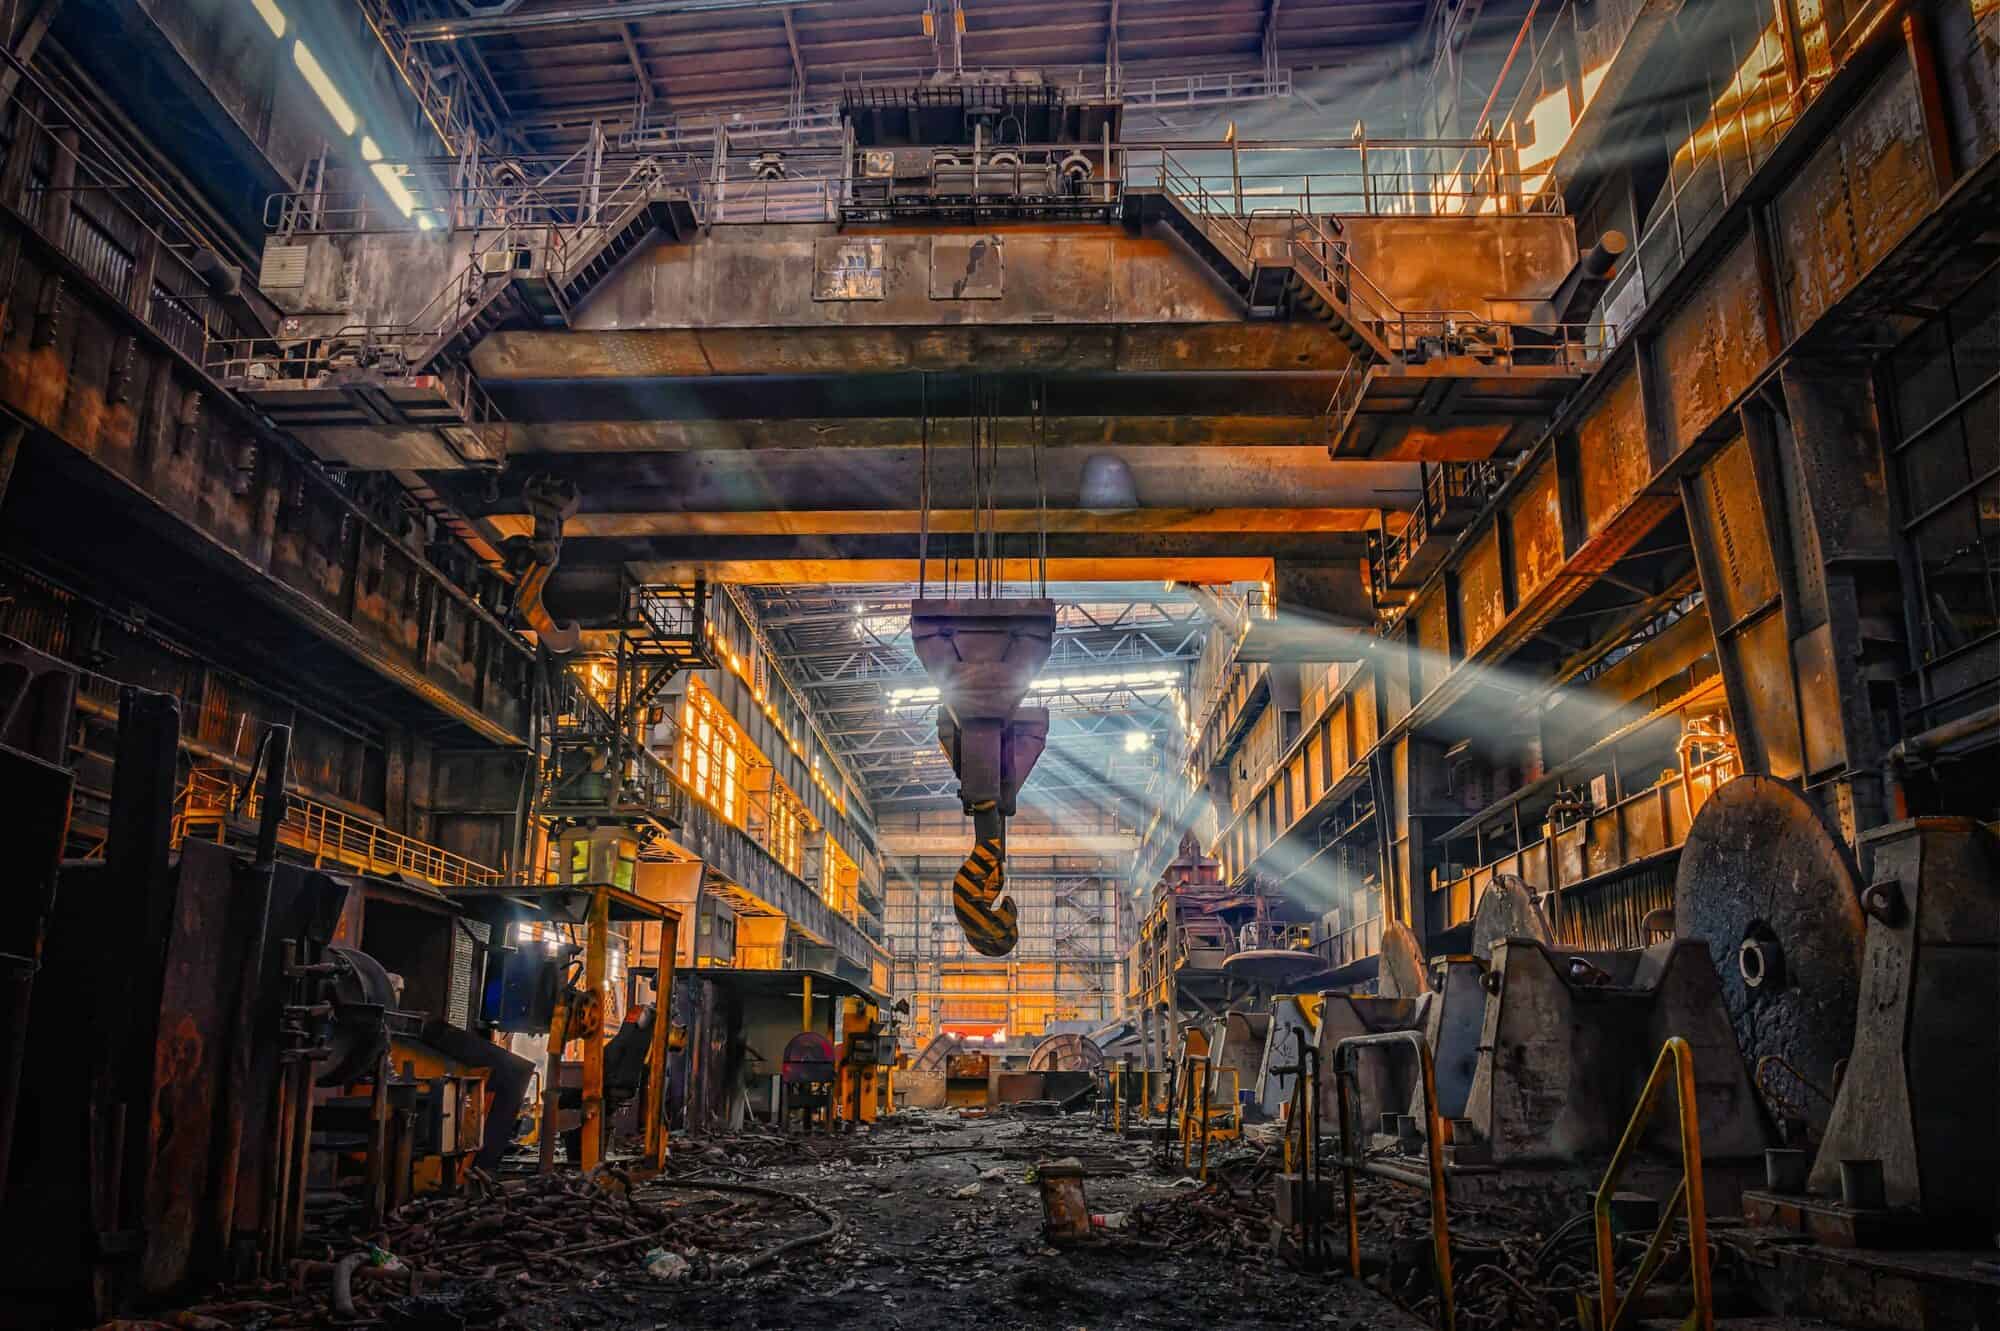 The inside of a derelict old steel mill.